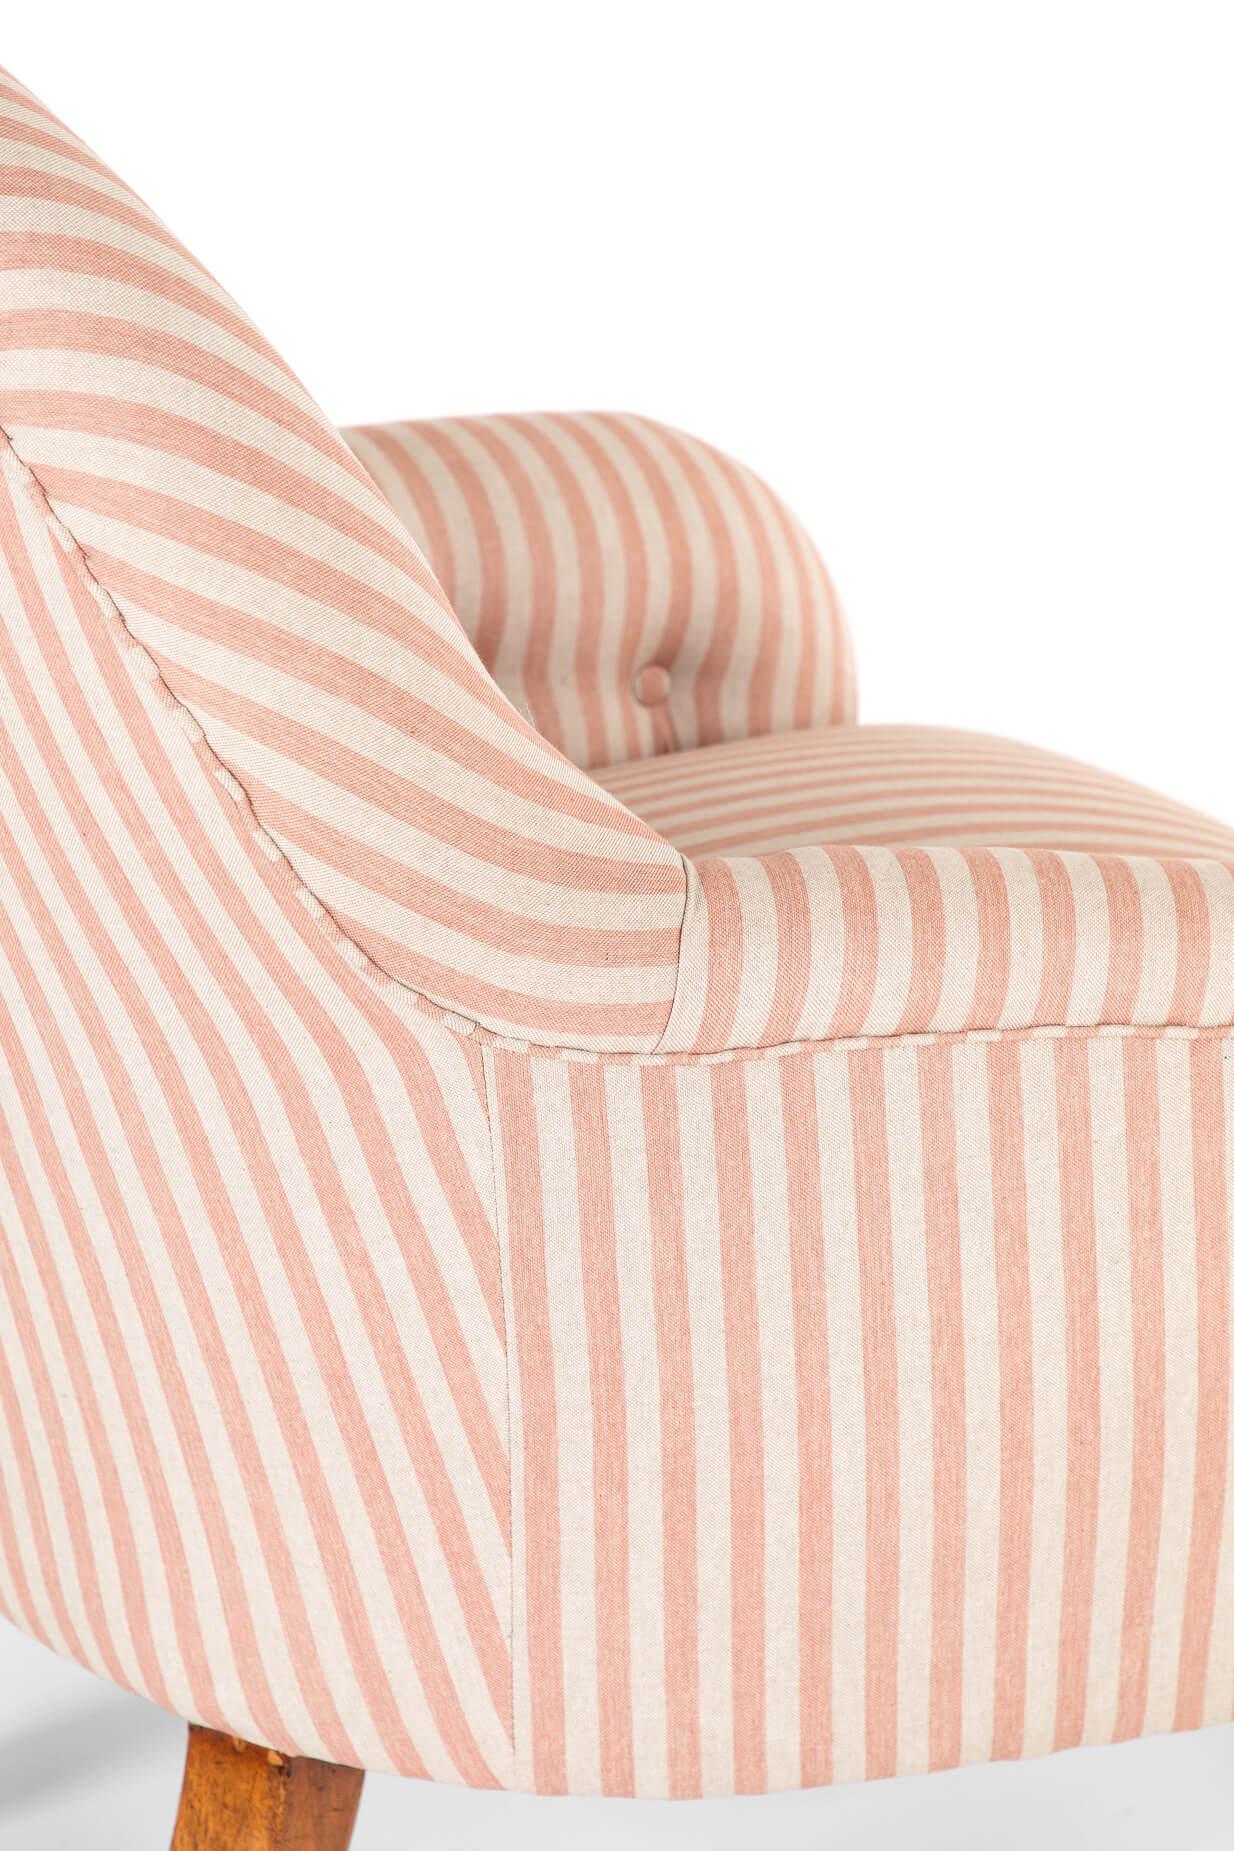 Late 19th Century Victorian Pink Stripe Button Back Armchair For Sale